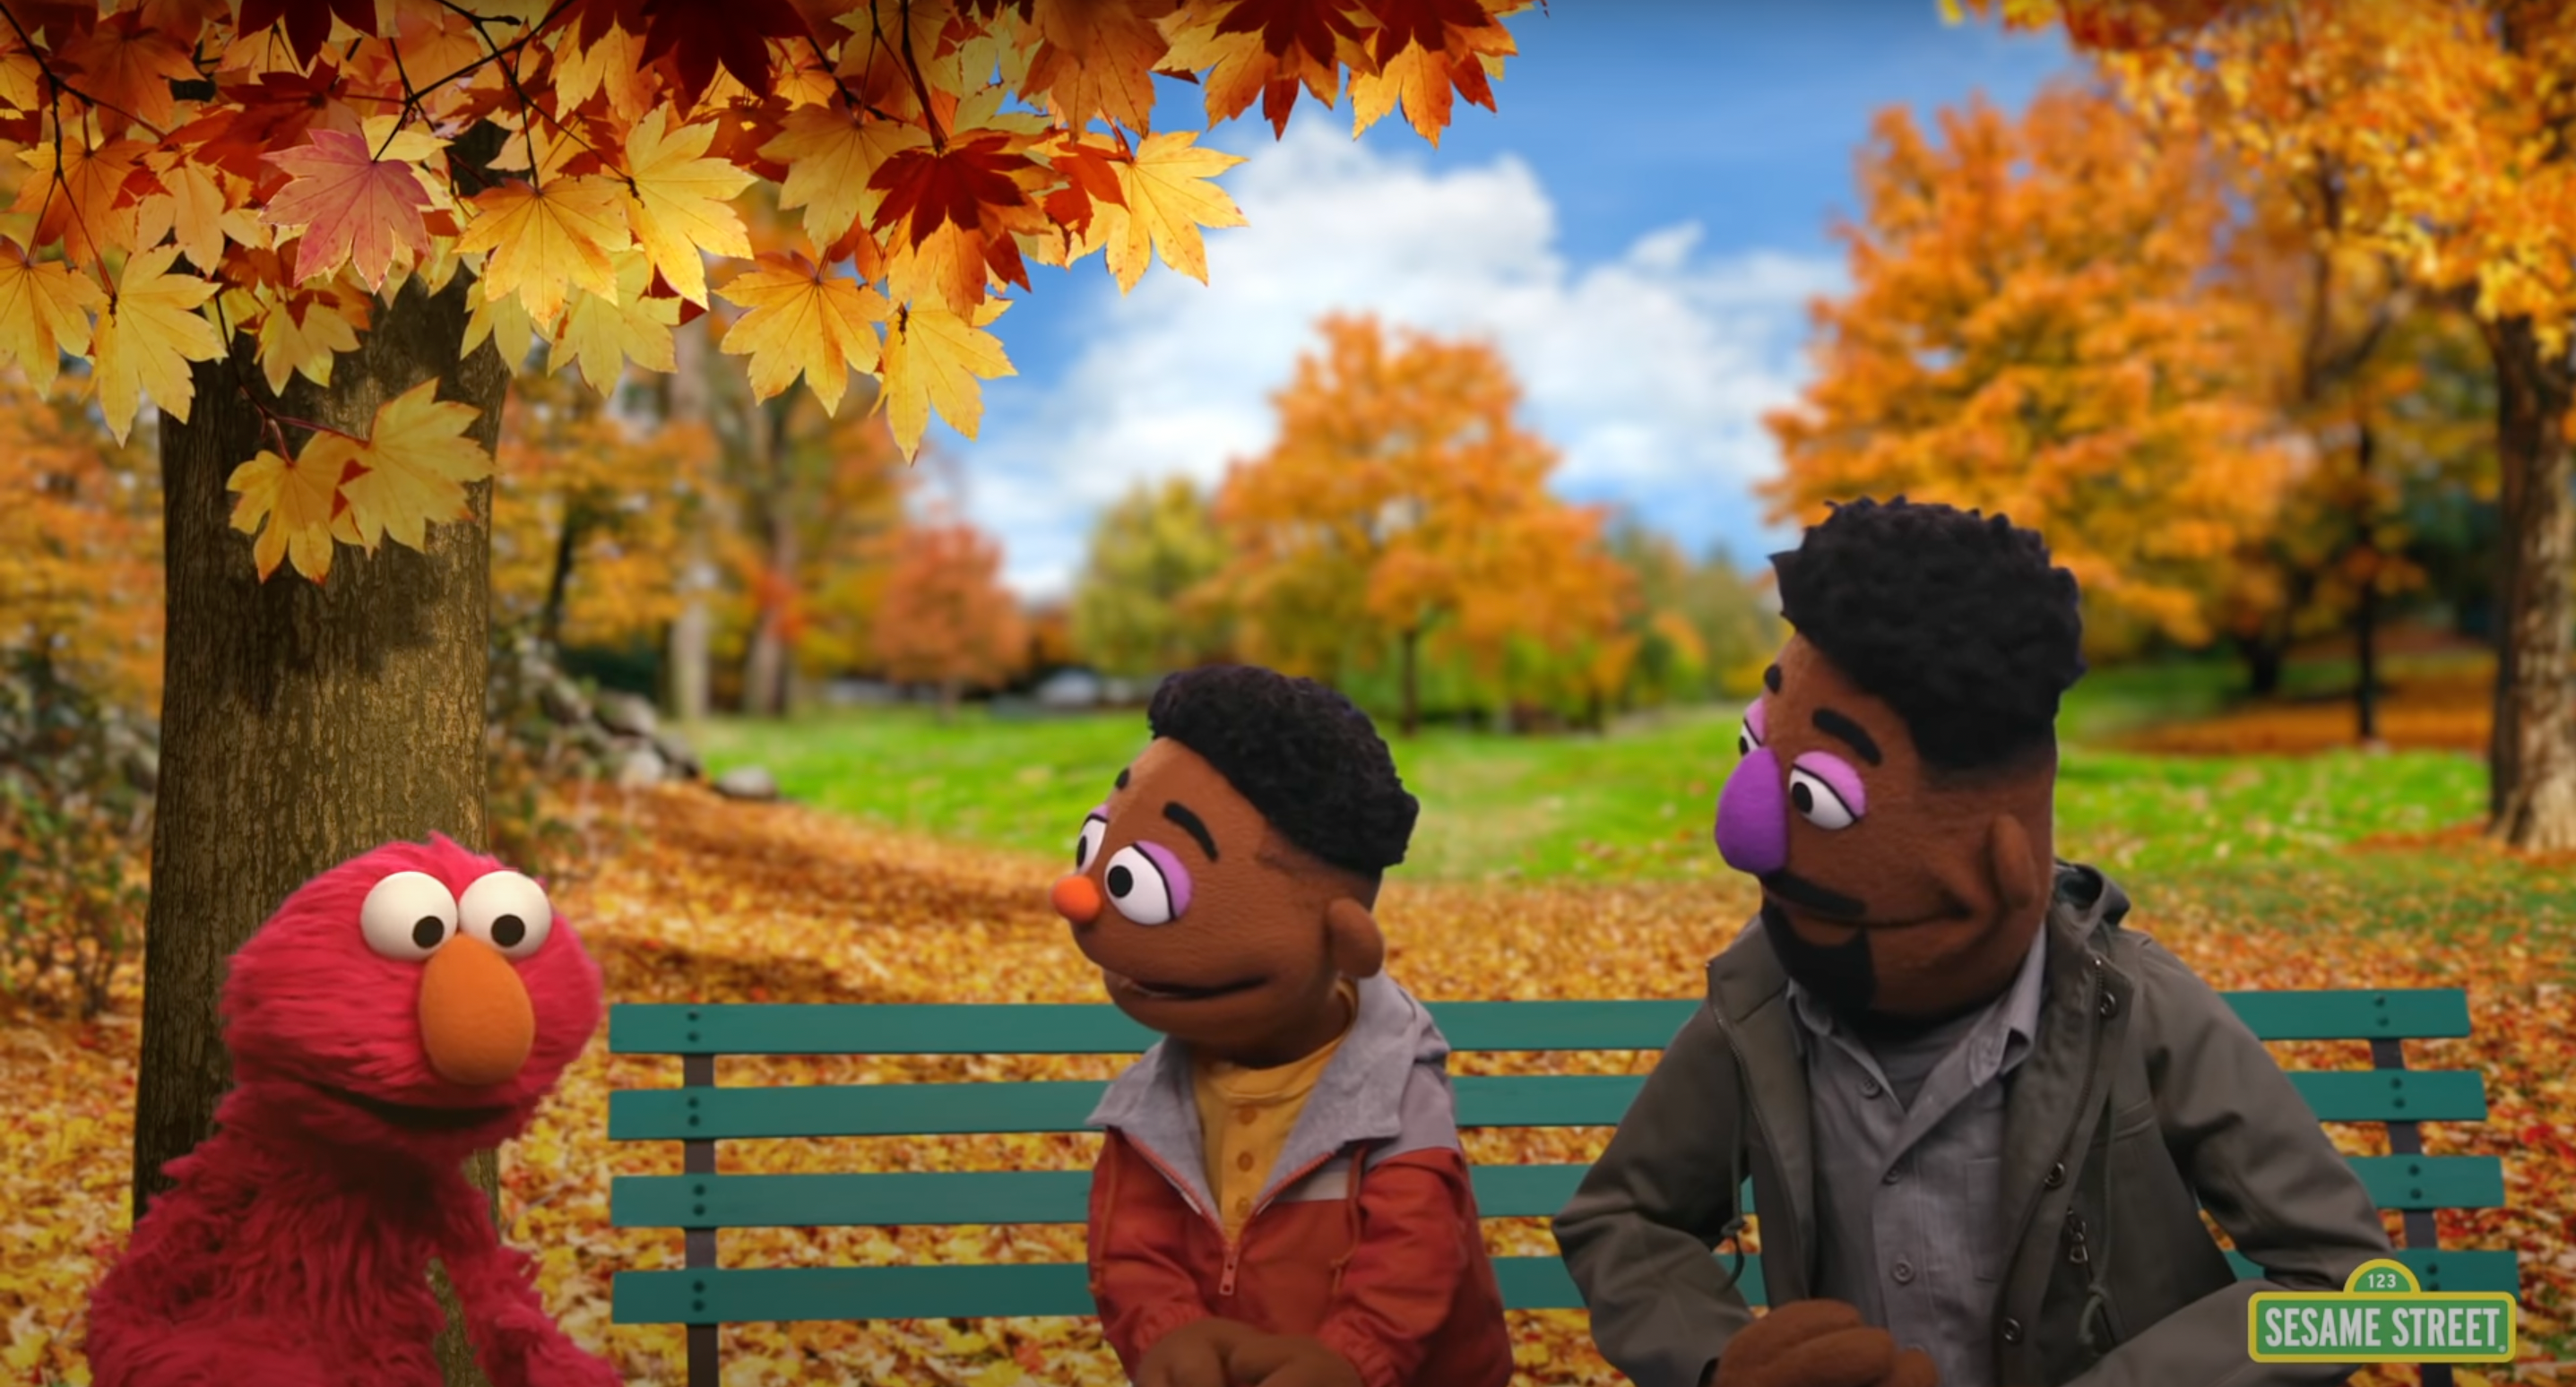 Sesame Street introduces two Black Muppets to teach Elmo skin color is 'an important part of who we are'